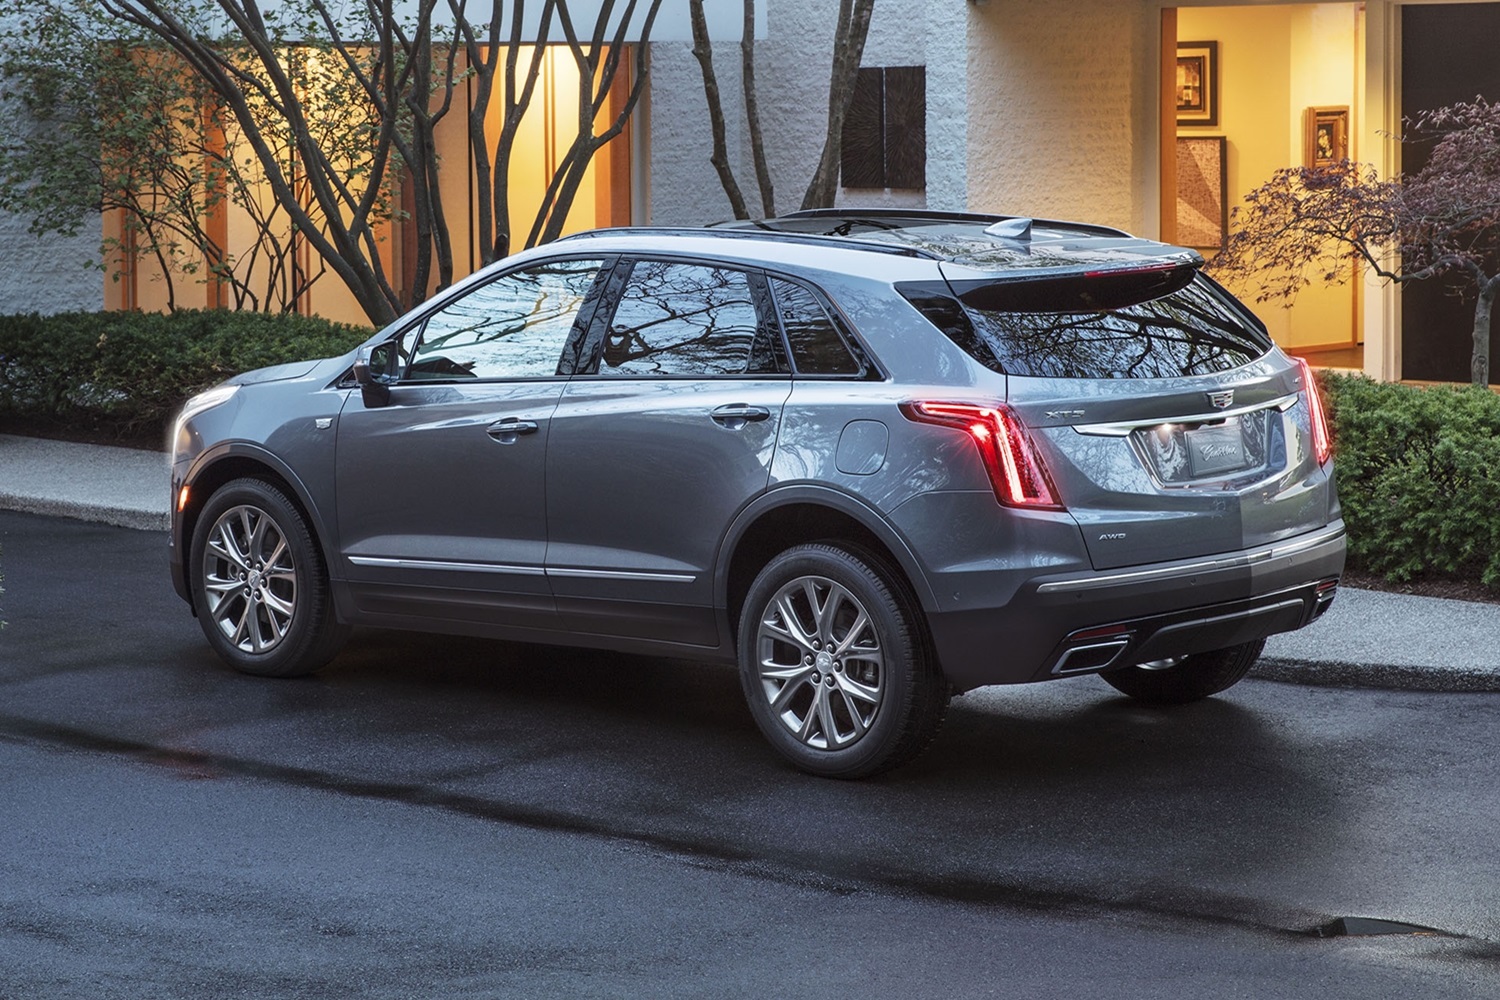 NextGen Cadillac XT5 To Lead Brand's Electric Vehicle Offensive